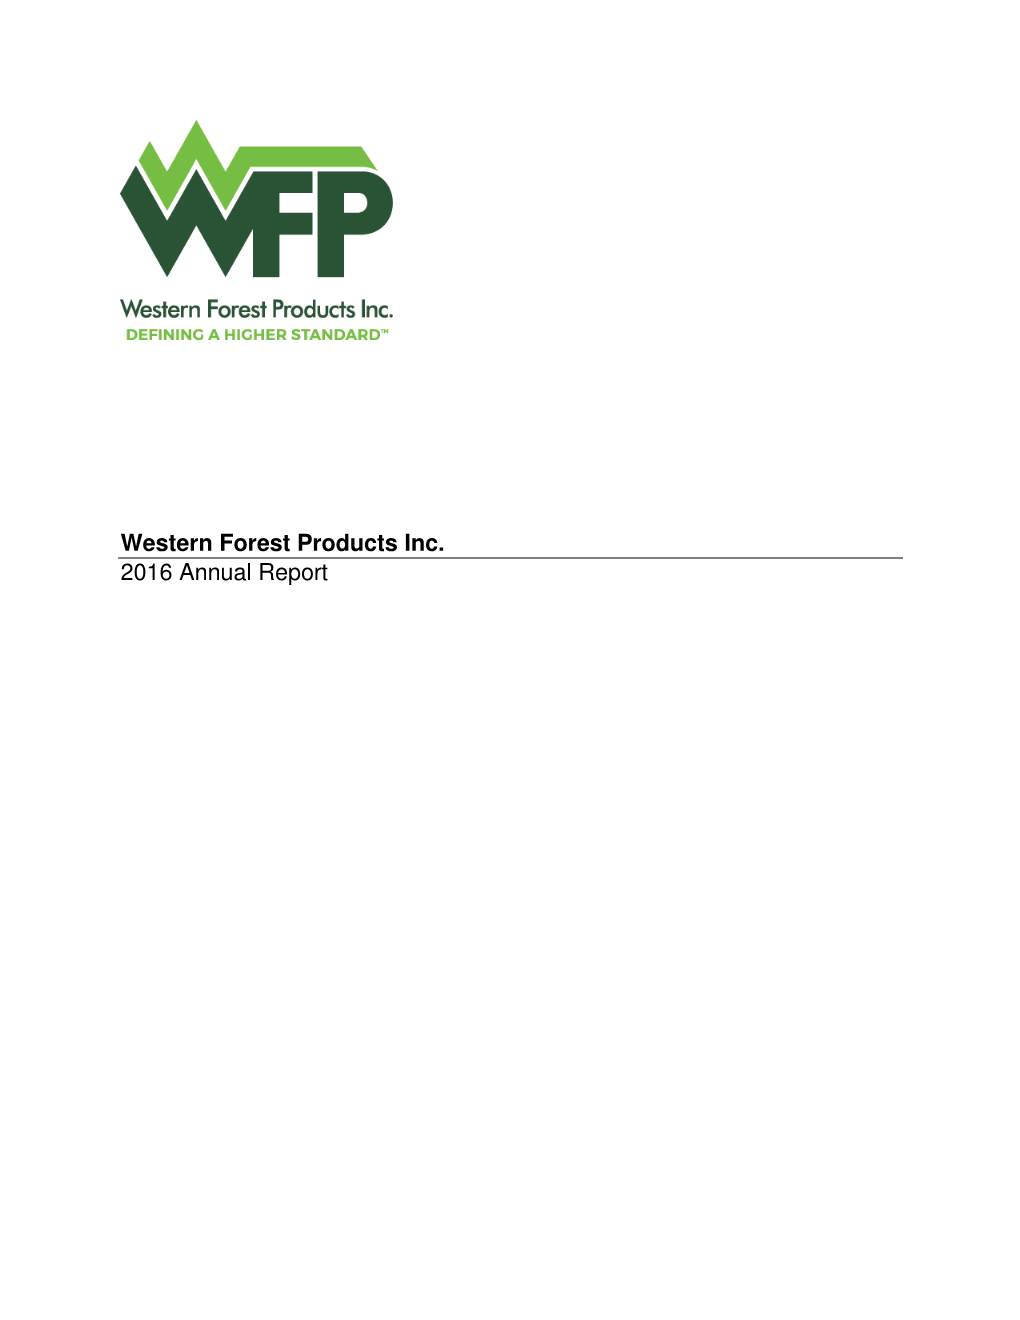 Western Forest Products Inc. 2016 Annual Report